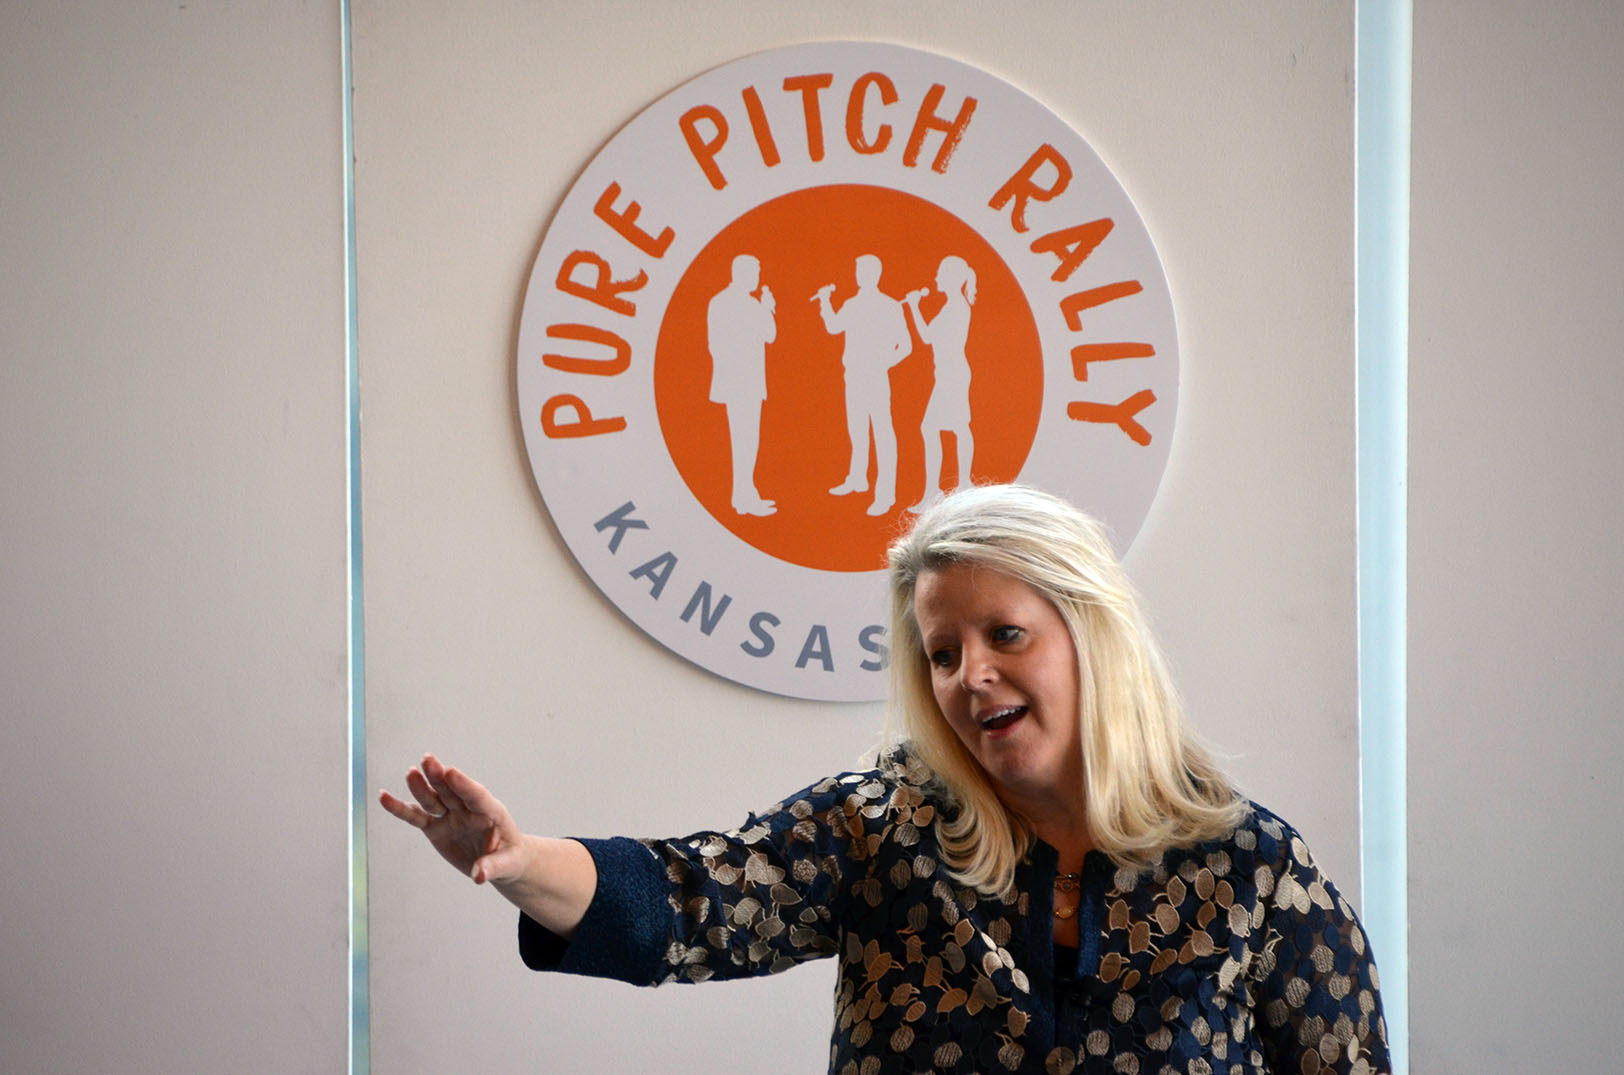 Pure Pitch Rally opens applications, plans for in-person fall event at new Loews hotel